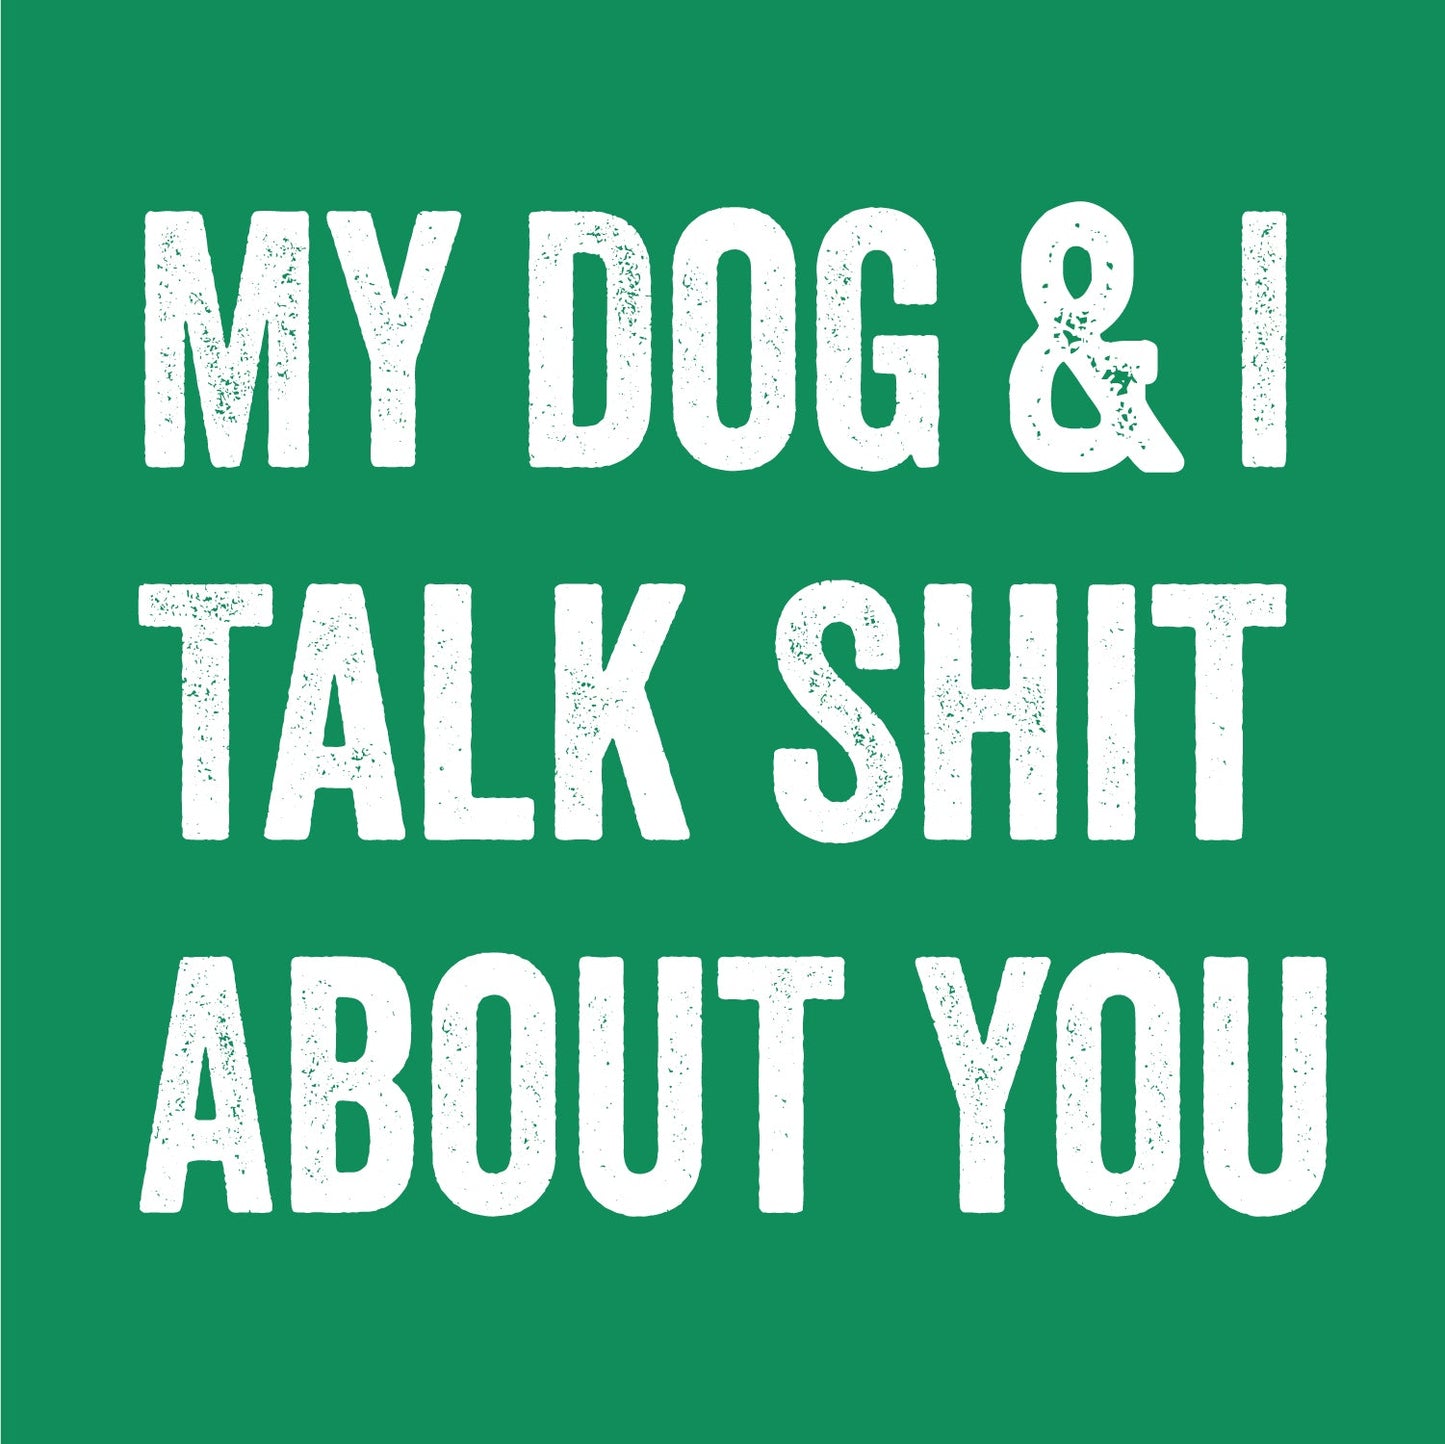 My Dog and I Talk Shit About You